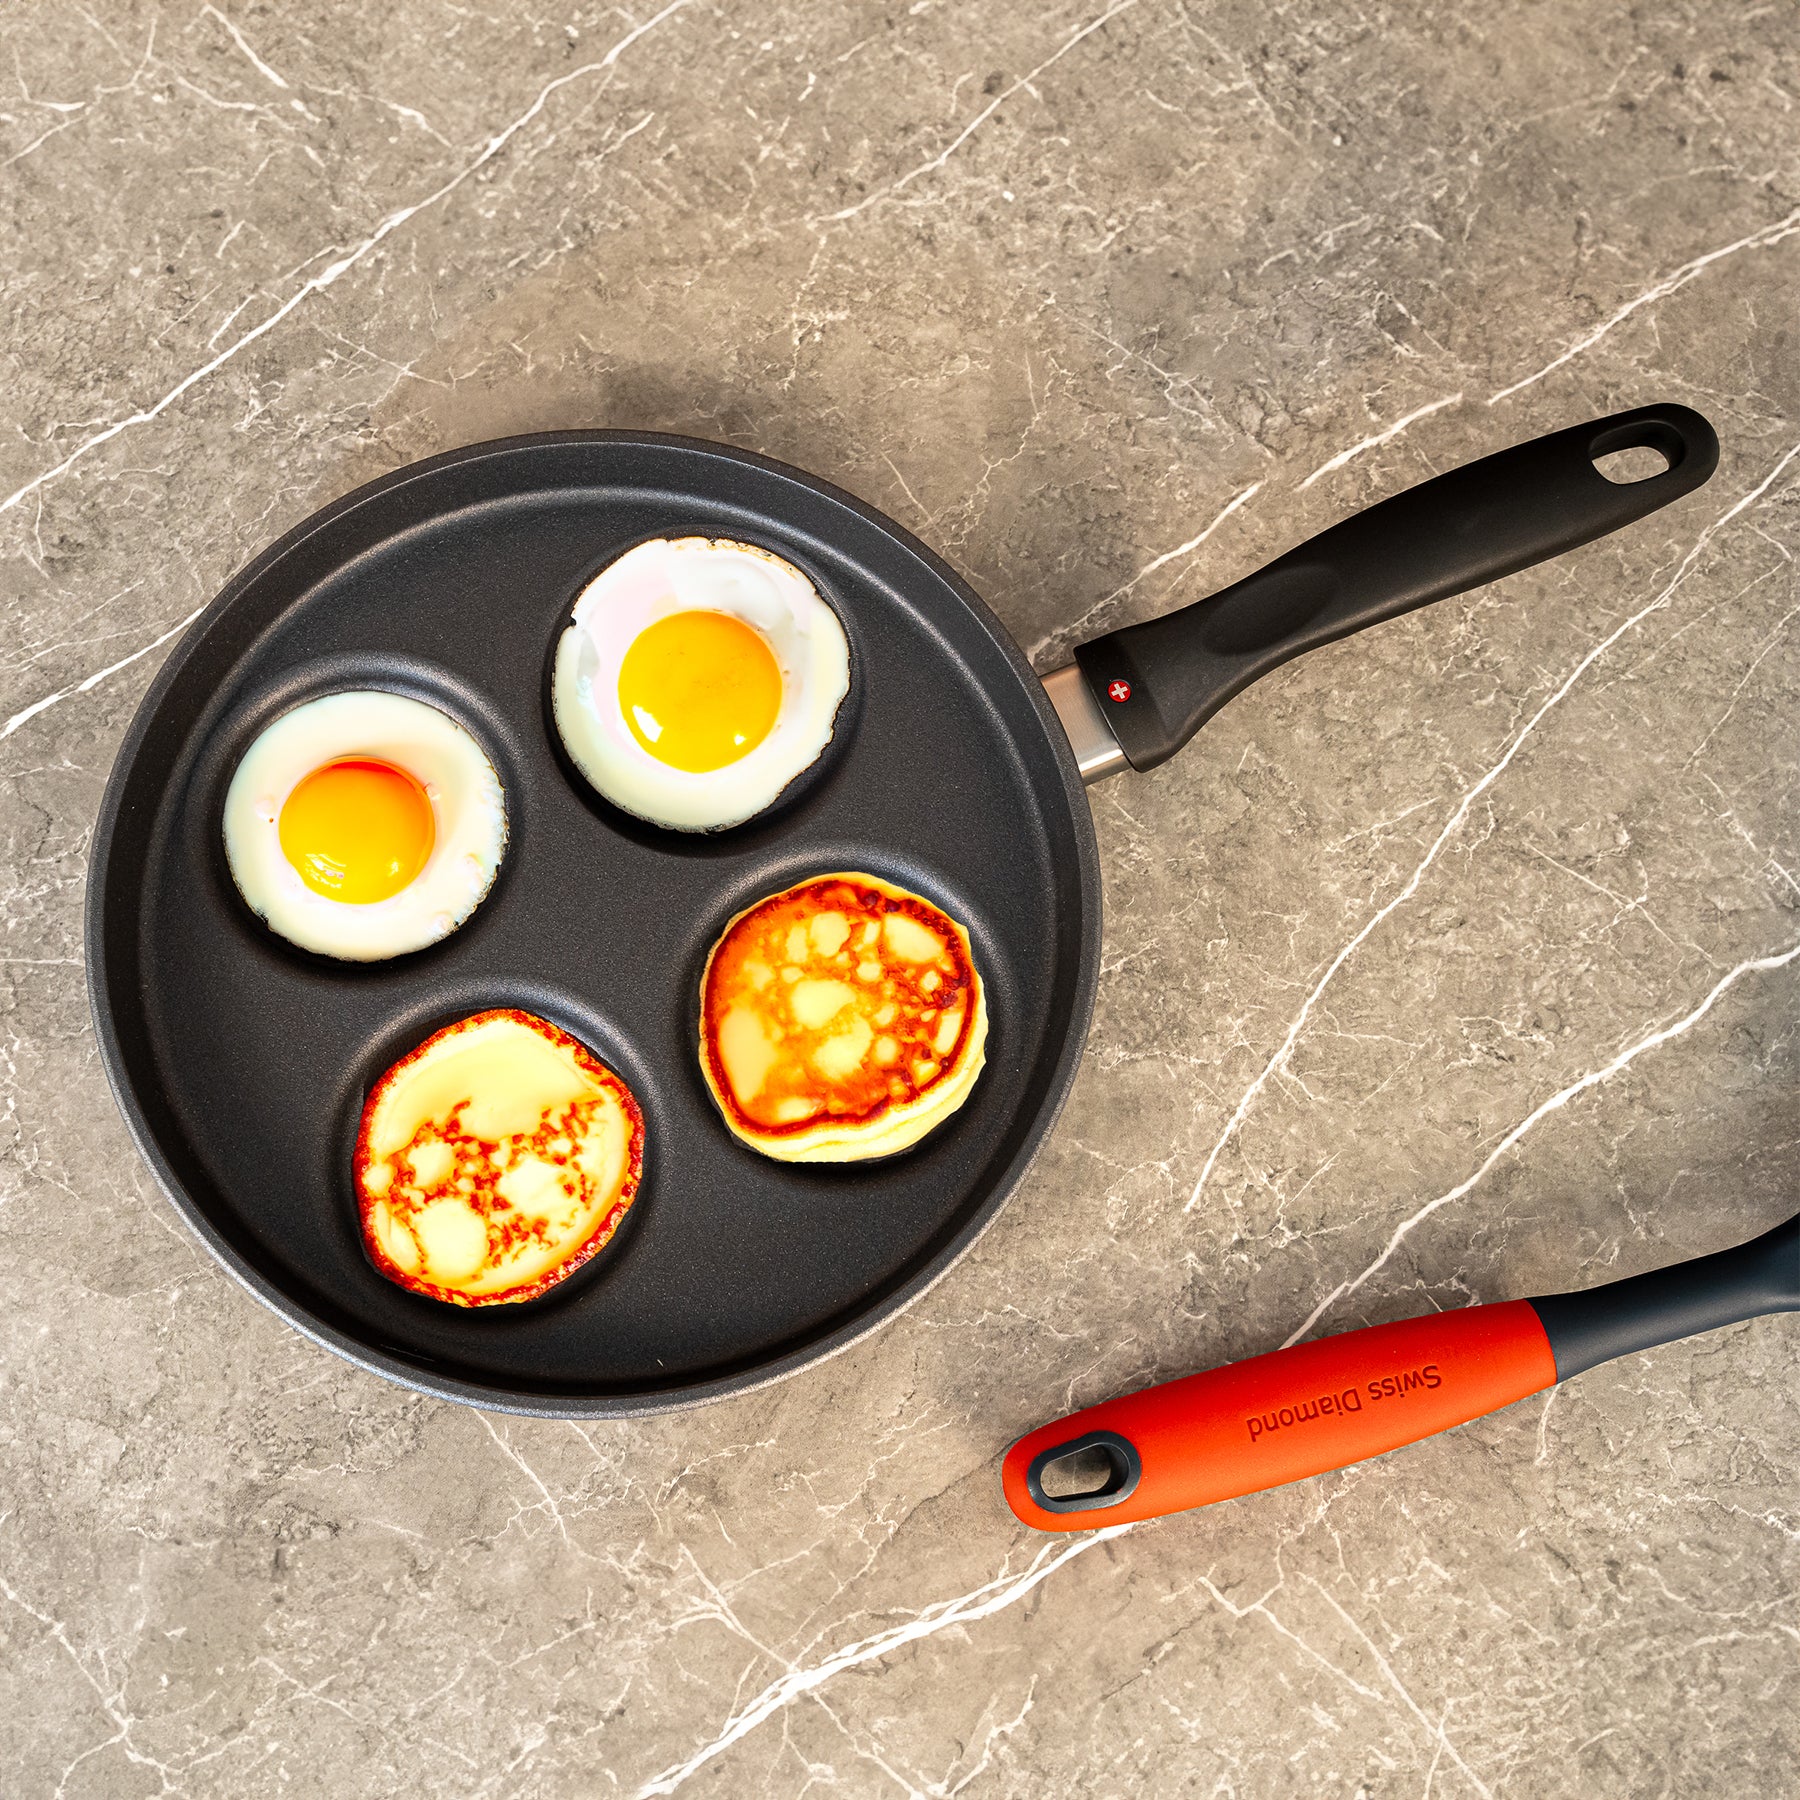 HD Nonstick 10.25" Plett Pan in use with eggs and pancakes on surface